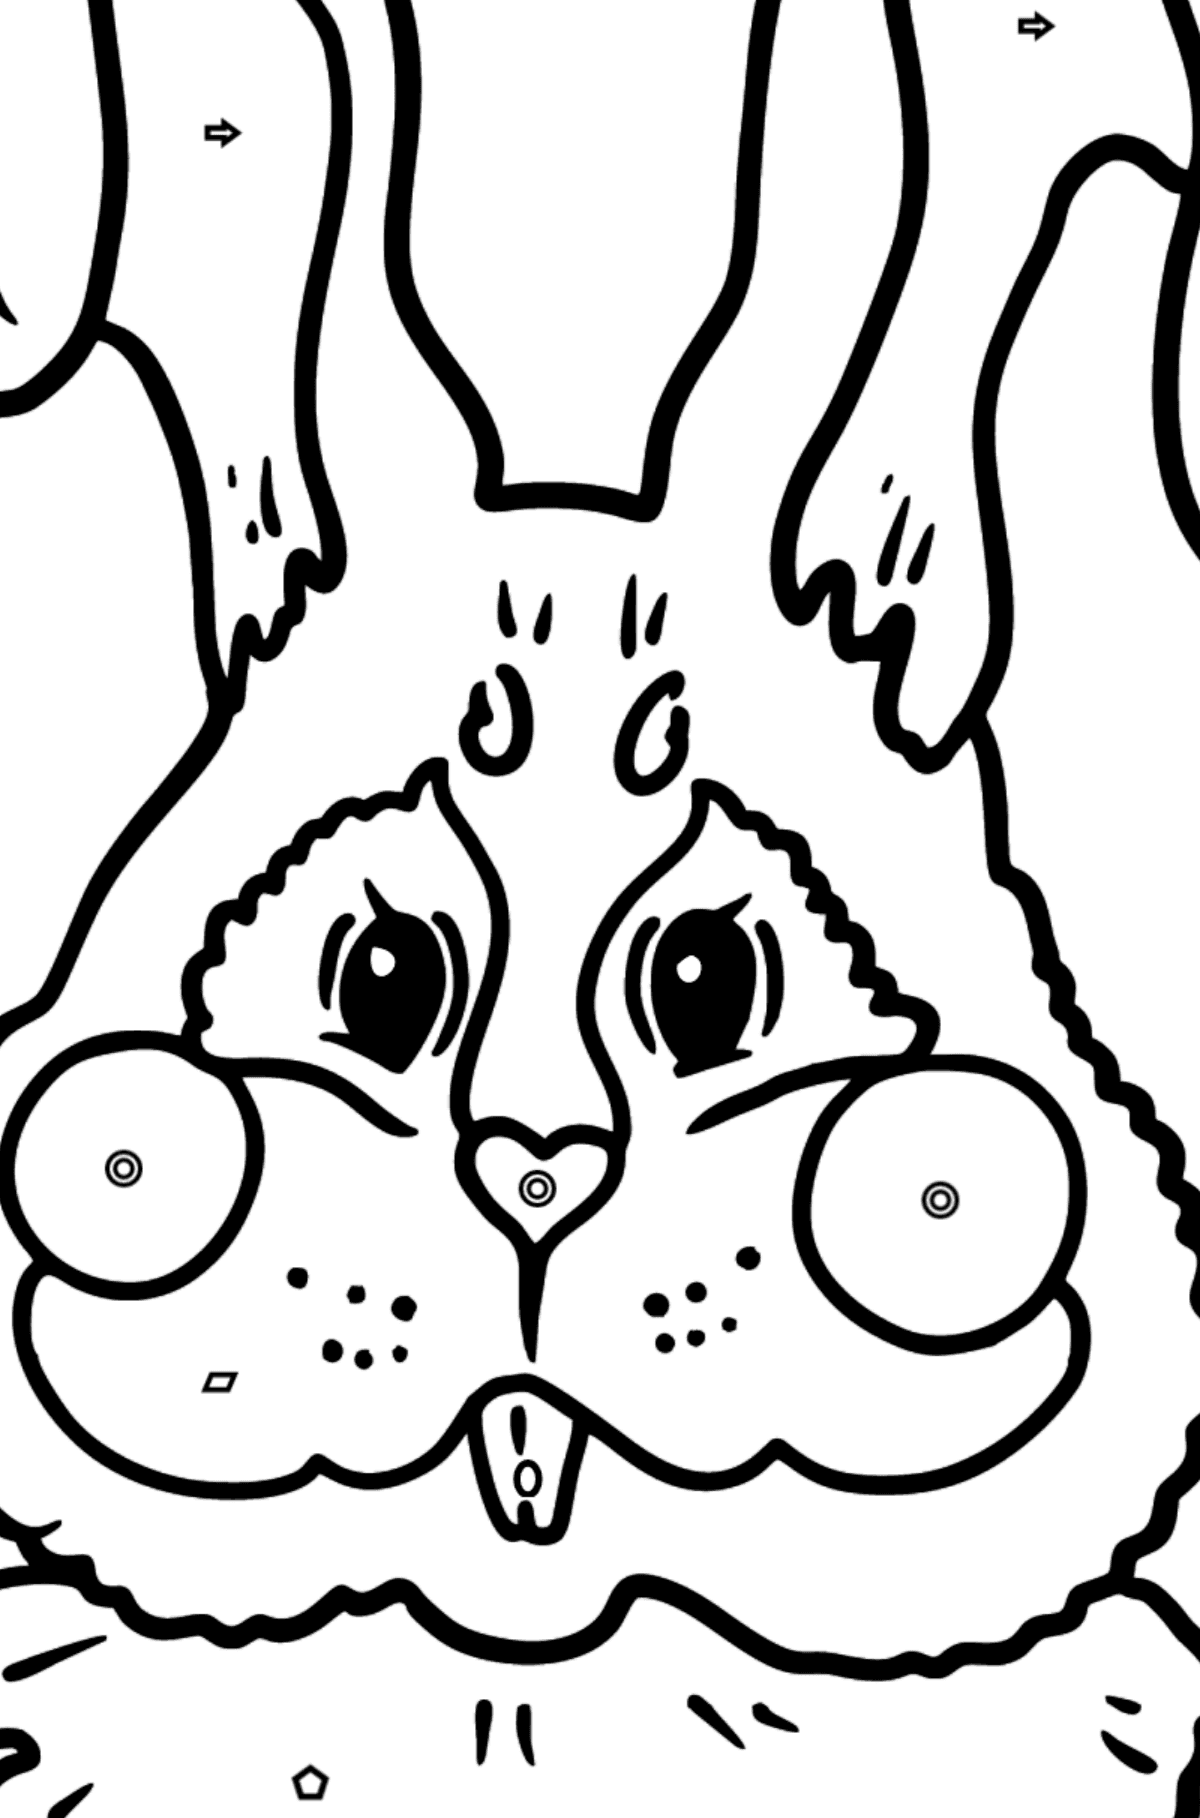 Bunny Face coloring page - Coloring by Geometric Shapes for Kids